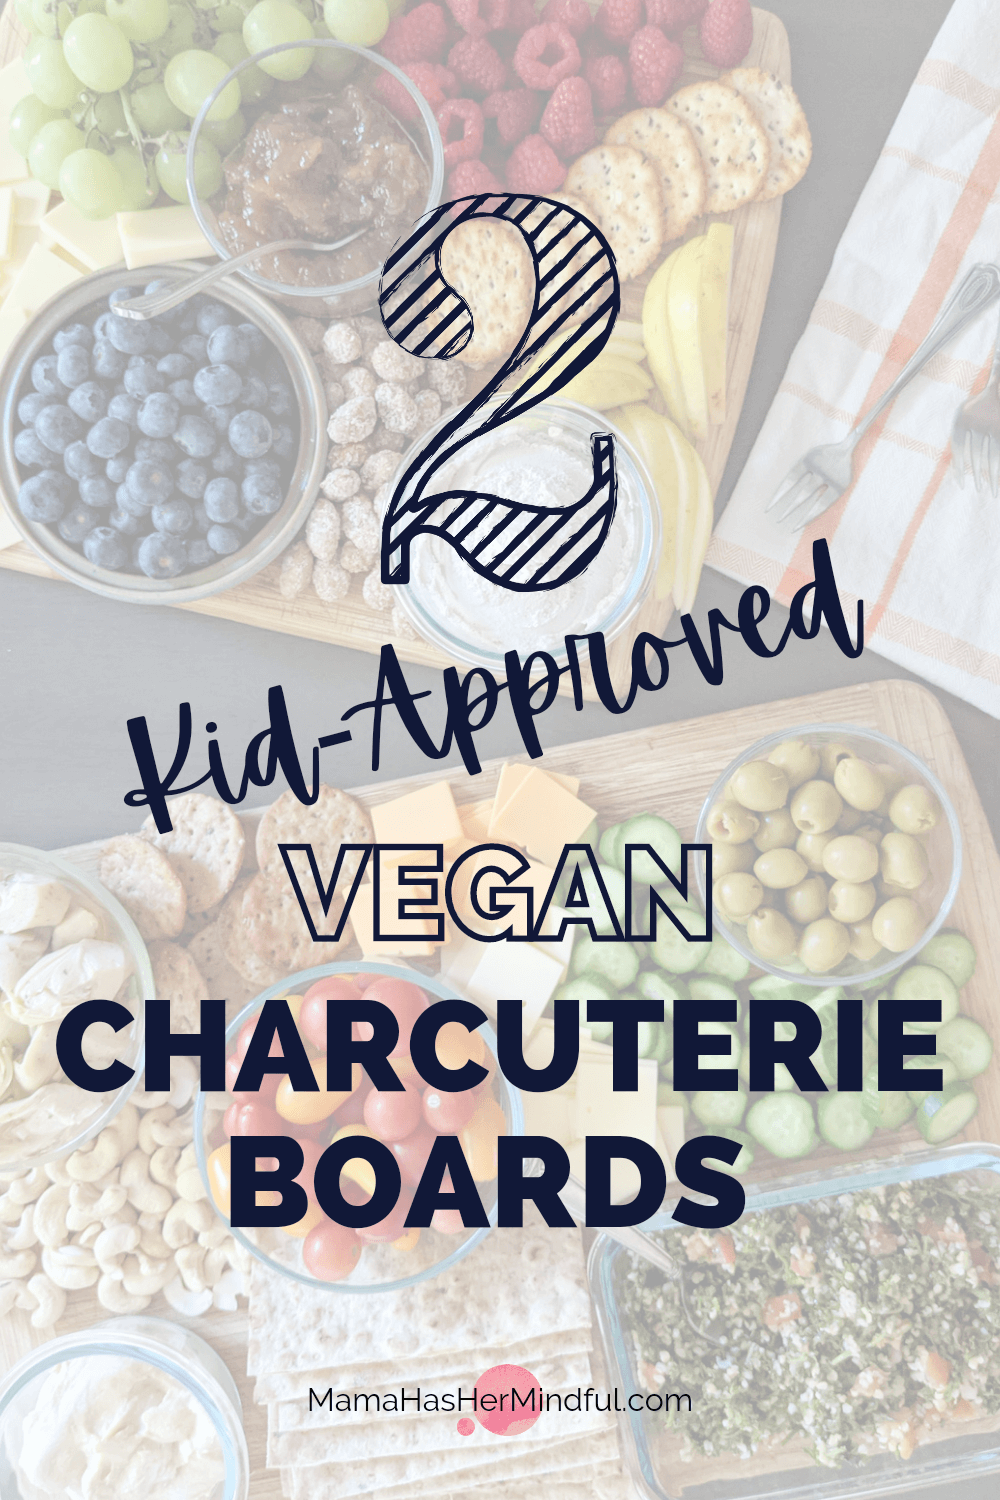 2 Easy Vegan Charcuterie Boards: DIY Plant-Based Appetizers